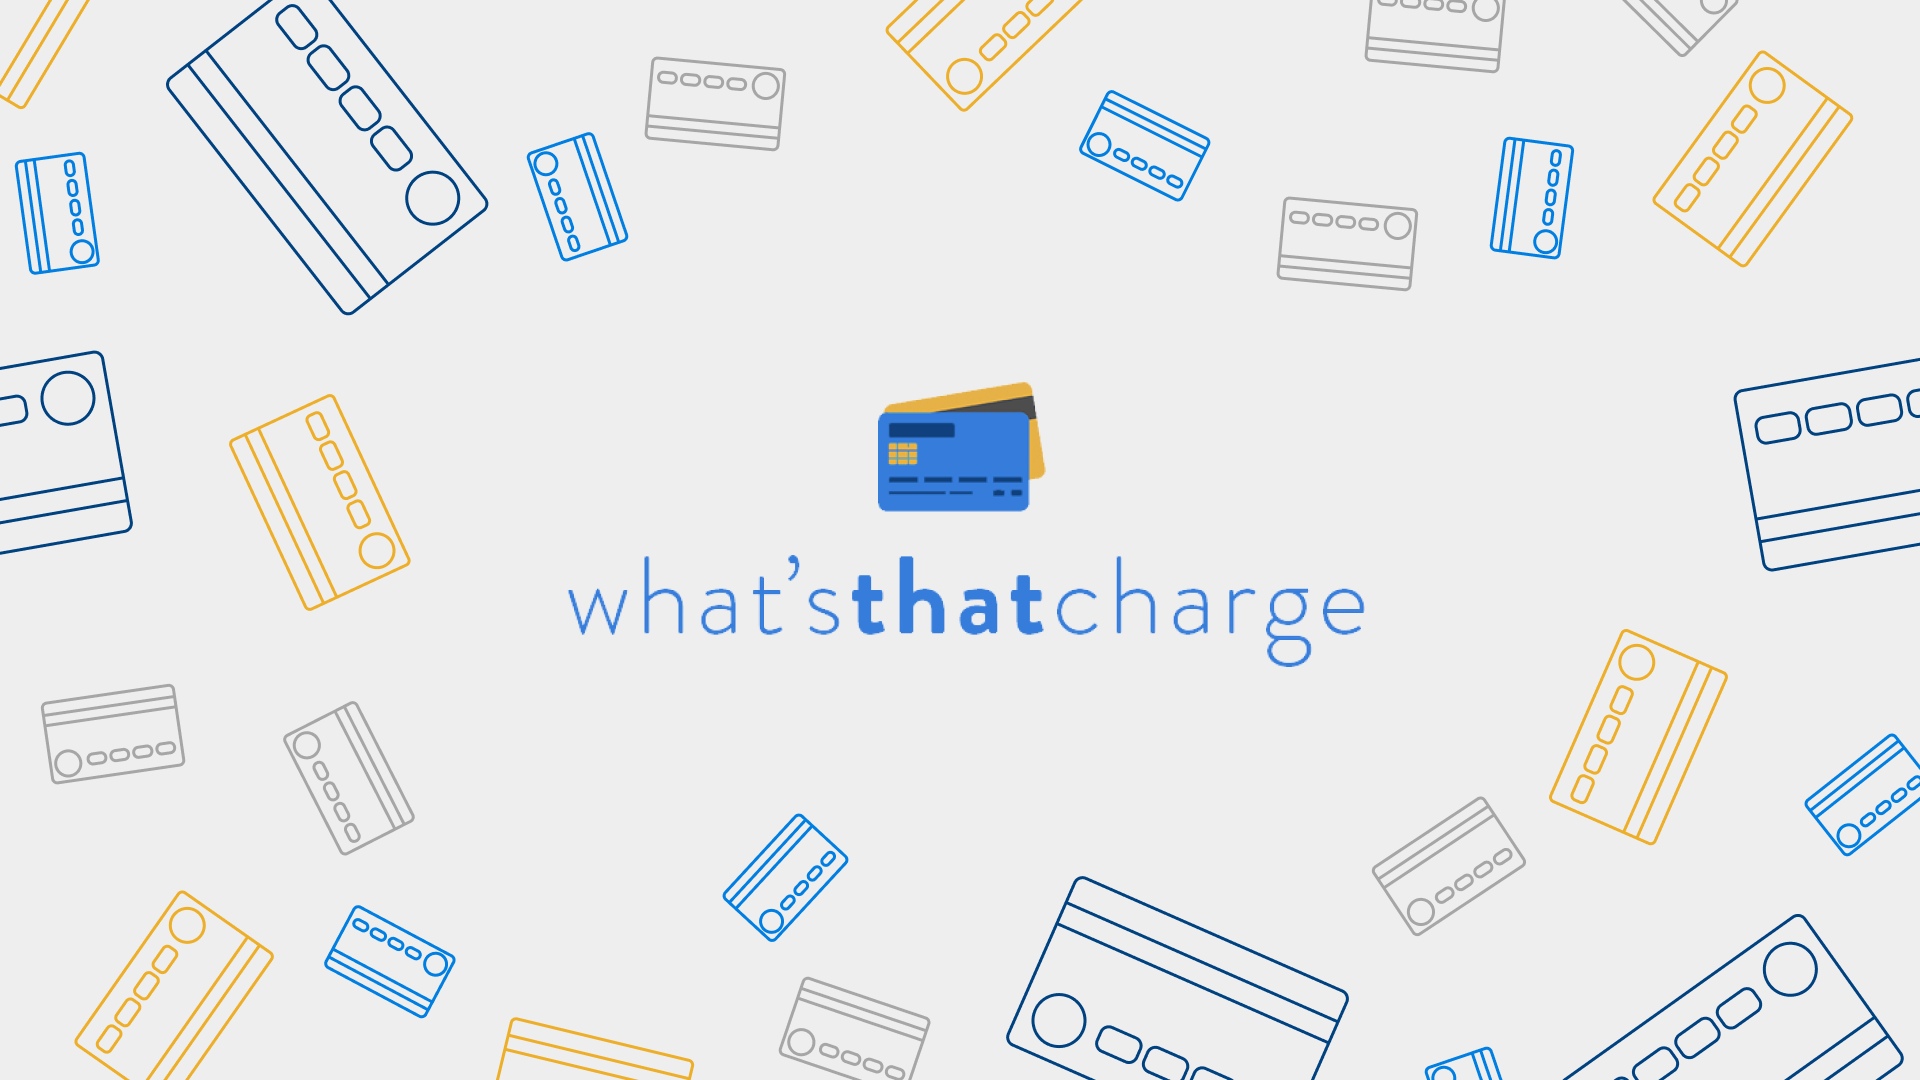 What's That Charge uses Nyckel to automate content moderation